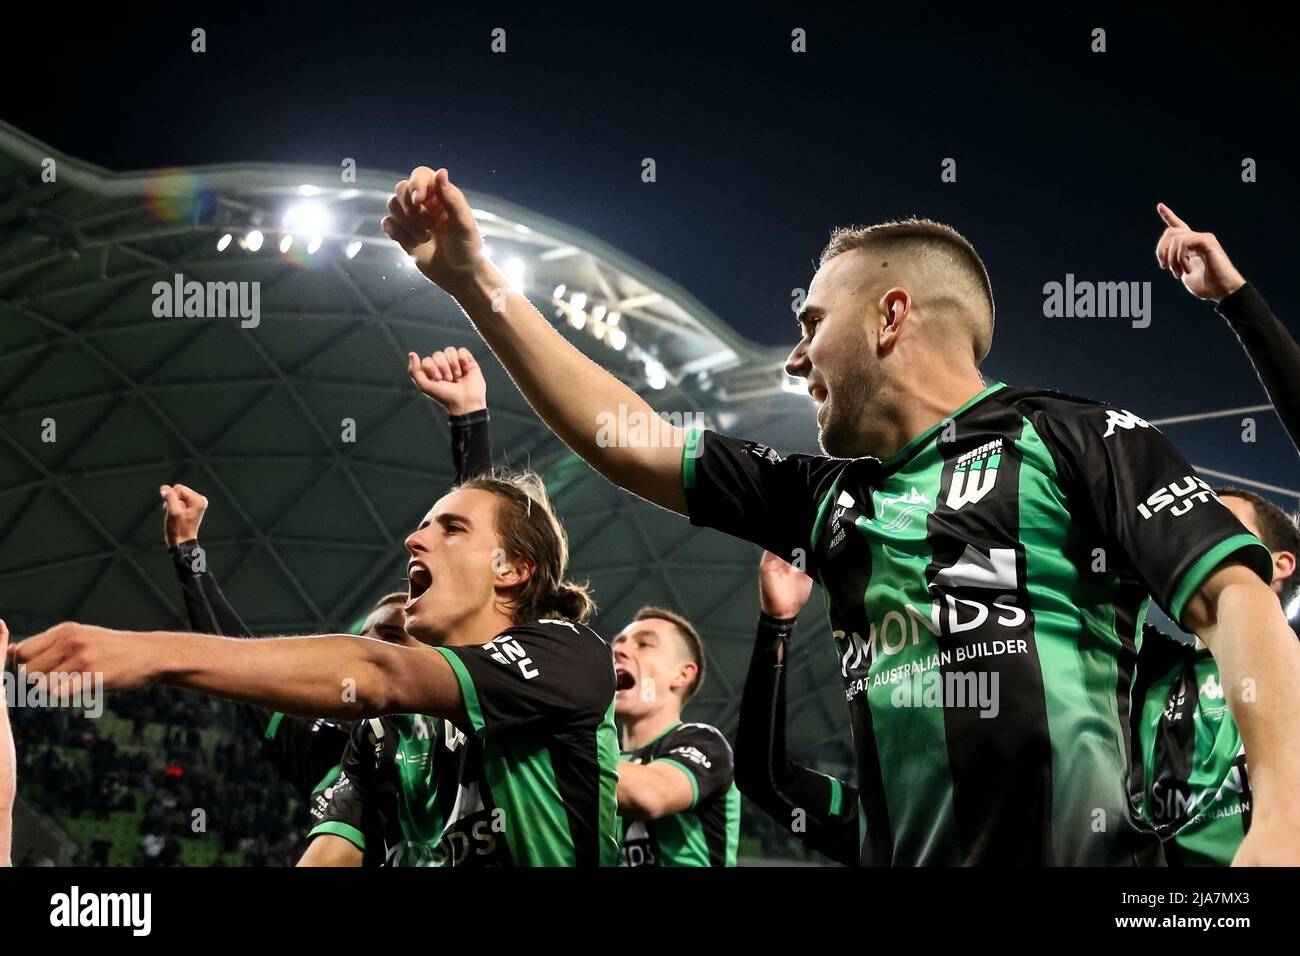 Melbourne, Australia, 28 May, 2022. Western United celebrate winning the grand final during the A-League Grand Final soccer match between Melbourne City FC and Western United at AAMI Park on May 28, 2022 in Melbourne, Australia. Credit: Dave Hewison/Speed Media/Alamy Live News Stock Photo